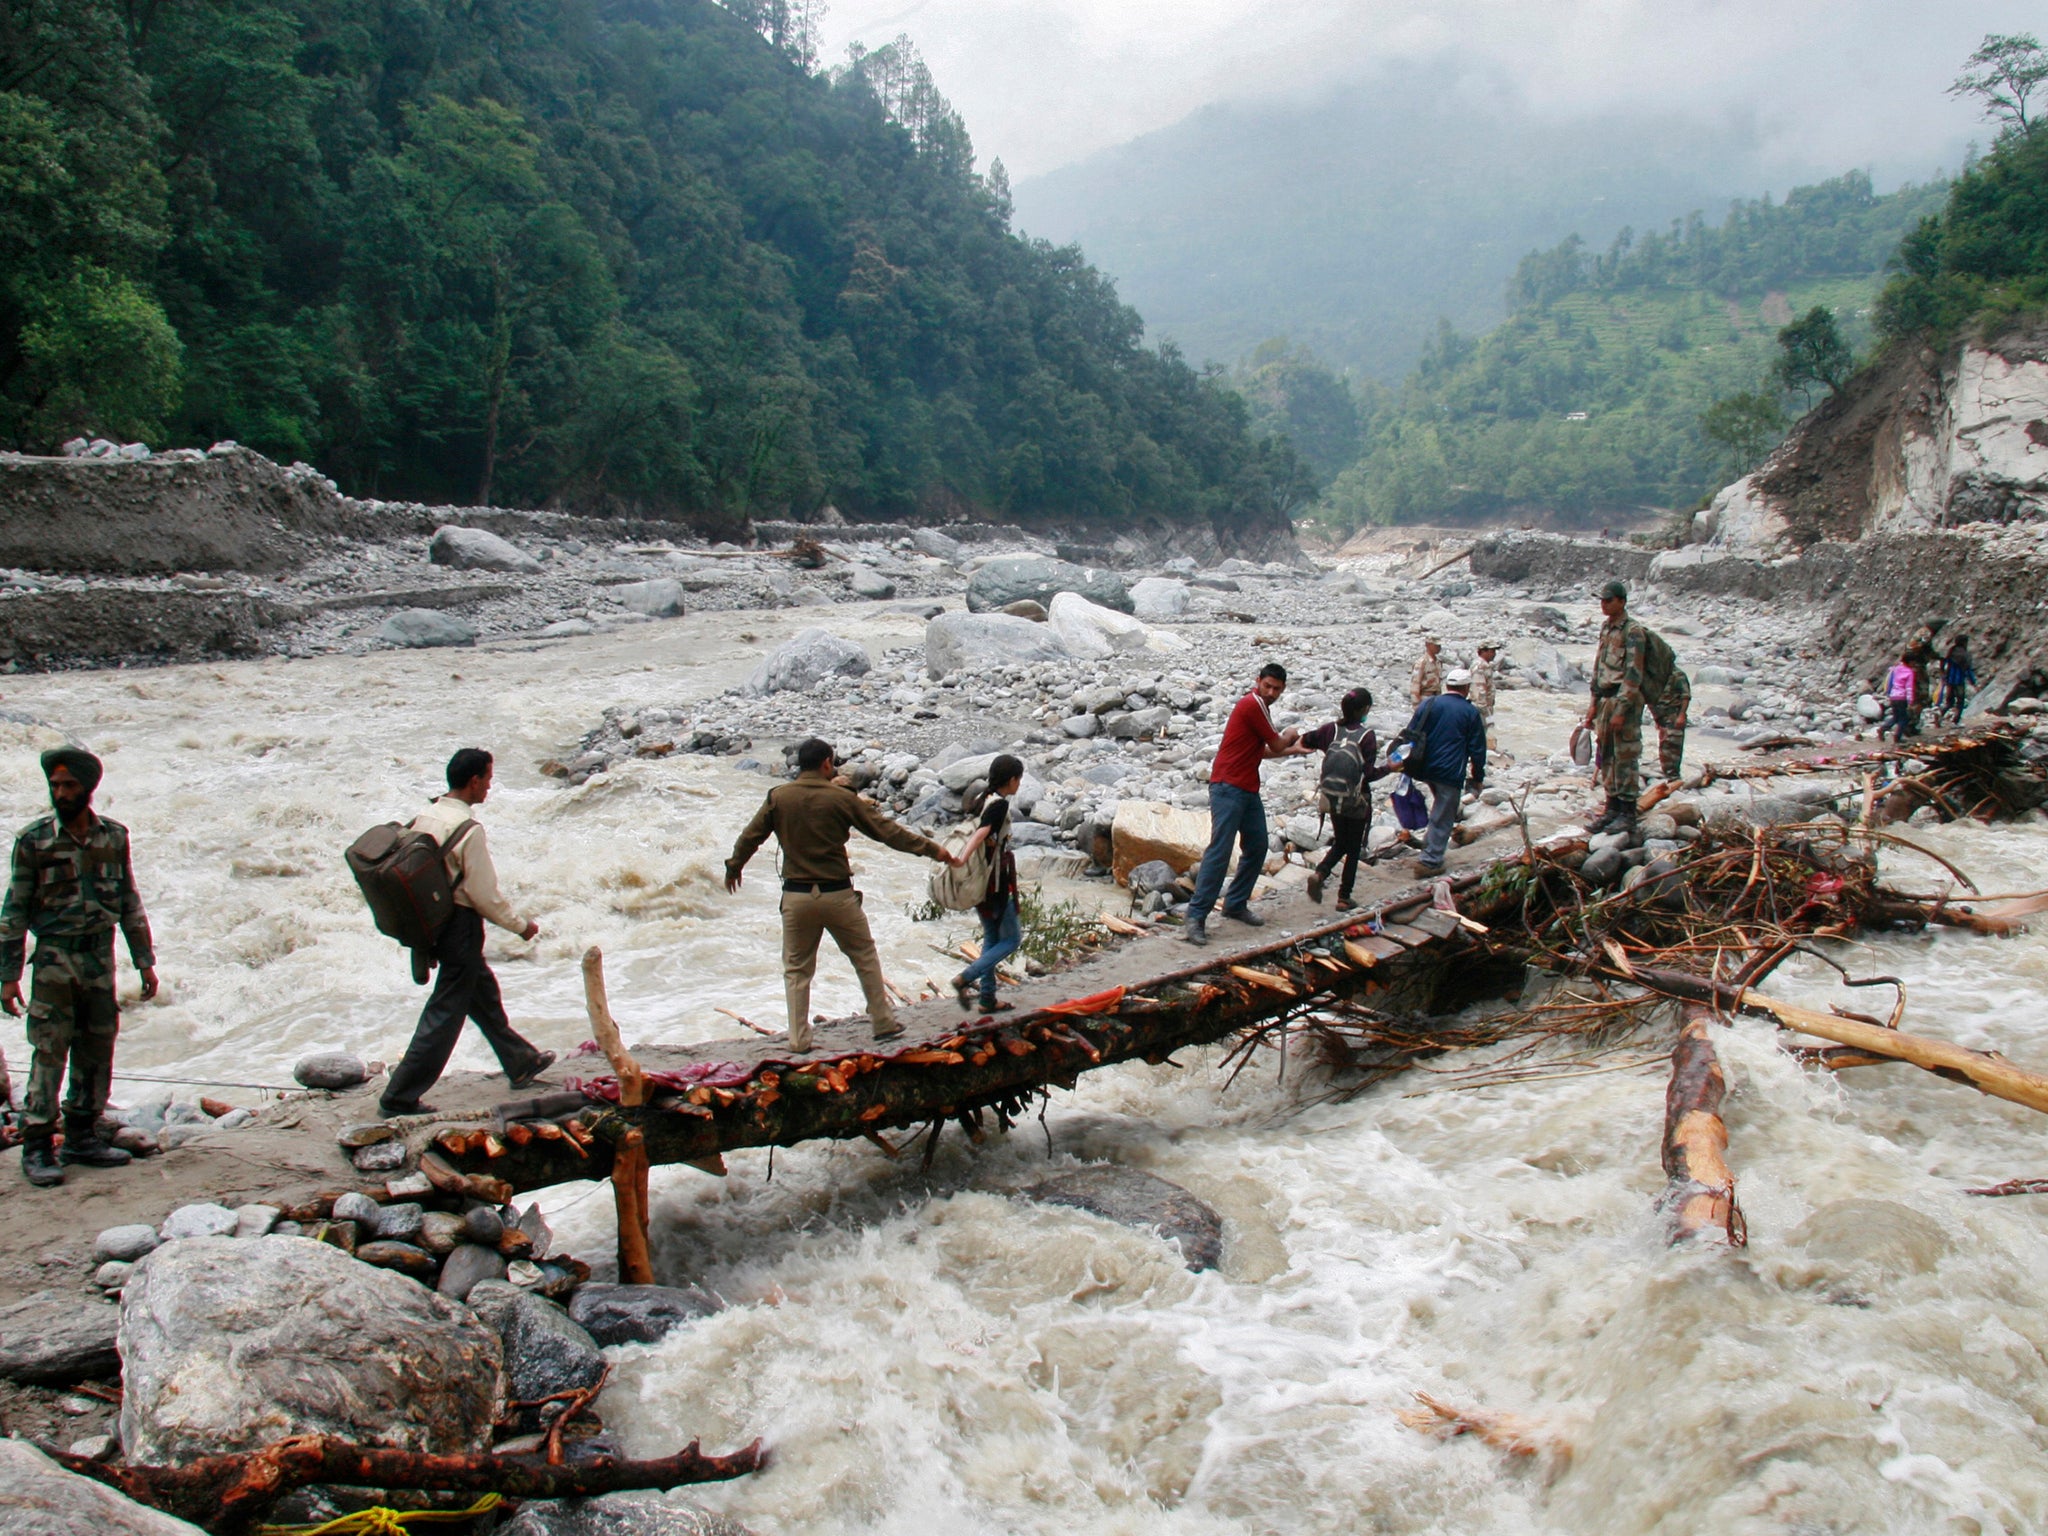 Indian army personnel help stranded people cross a flooded river after heavy rains in the Himalayan state of Uttarakhand, Flash floods and landslides killed thousands.